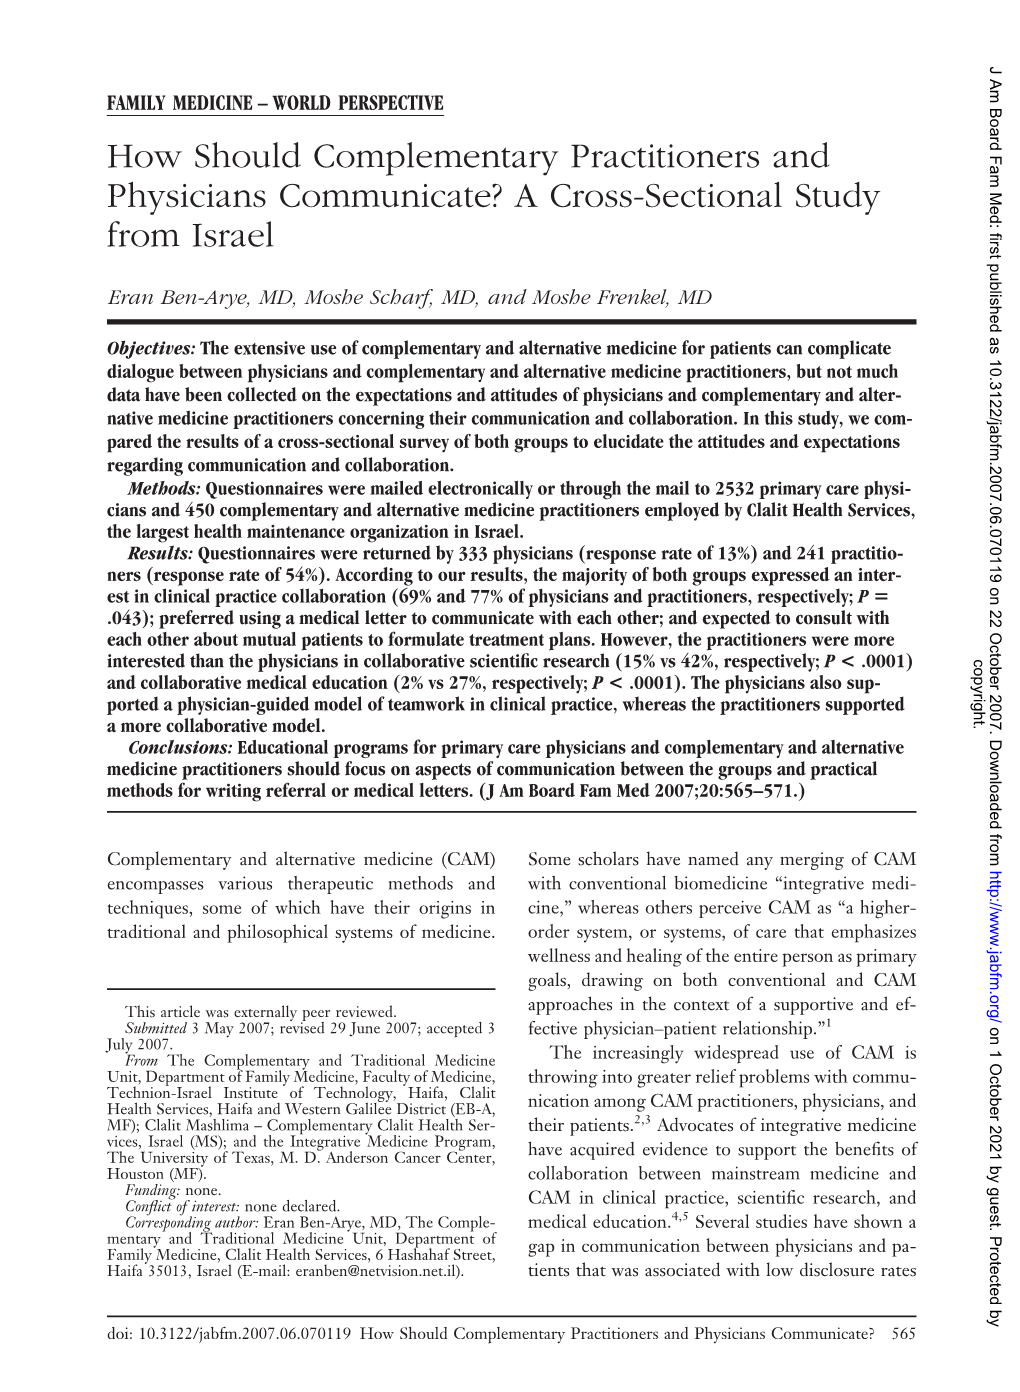 How Should Complementary Practitioners and Physicians Communicate? a Cross-Sectional Study from Israel